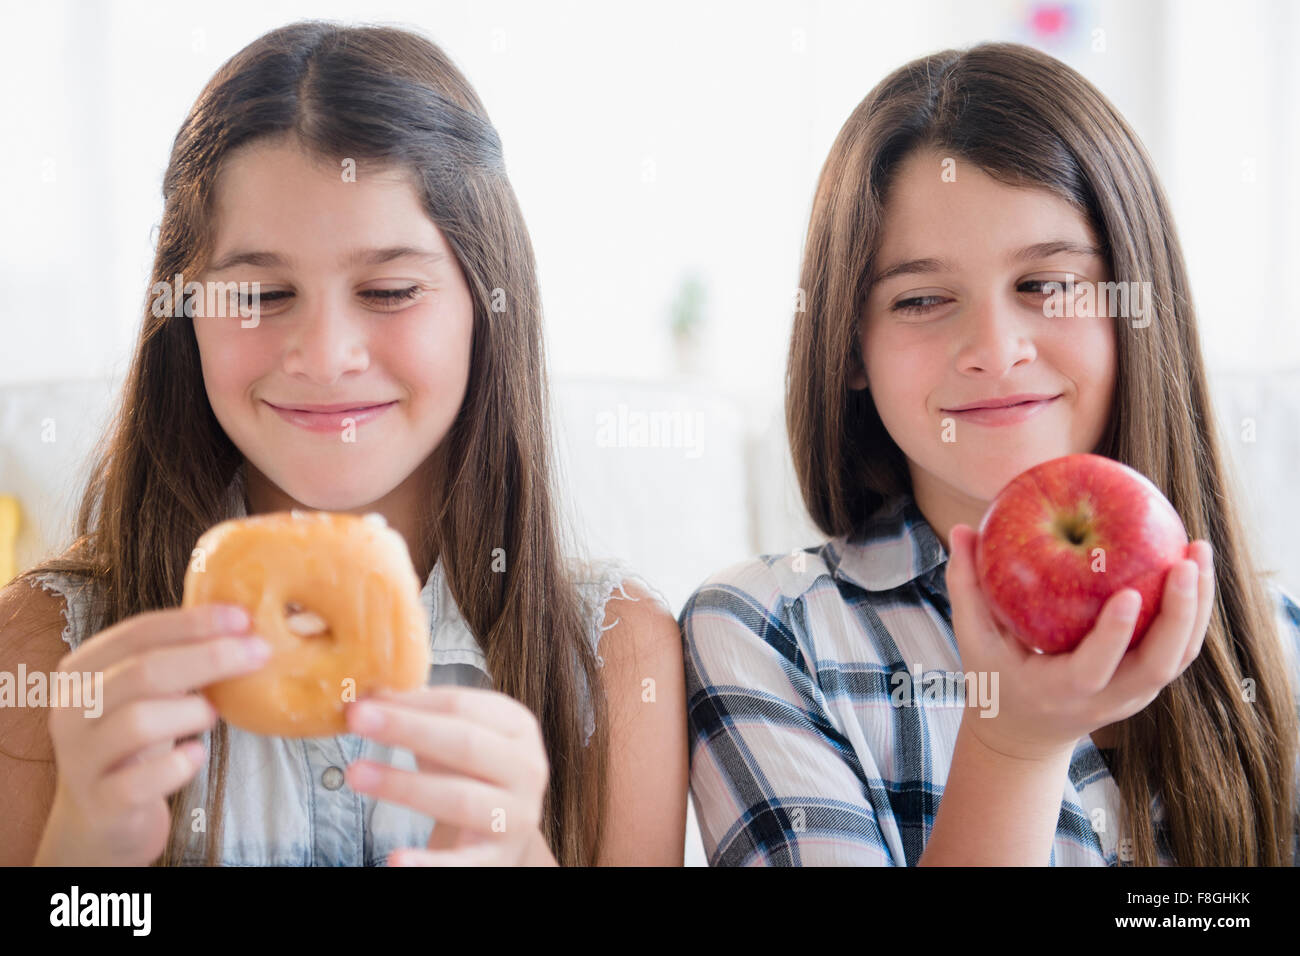 Caucasian twin sisters eating healthy and unhealthy snacks Stock Photo